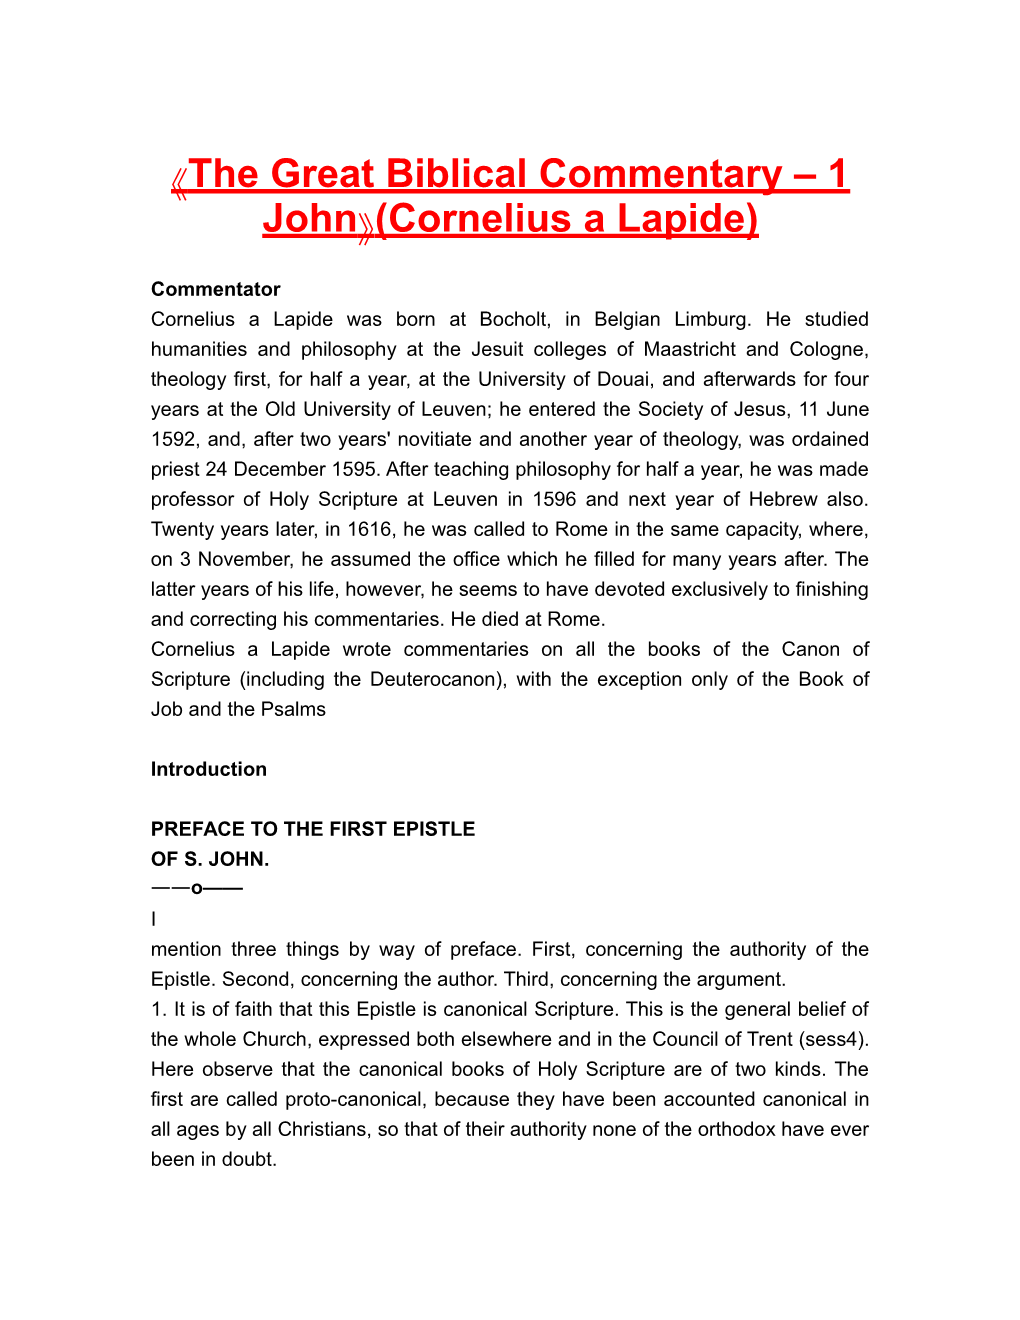 The Great Biblical Commentary 1 John (Cornelius a Lapide)